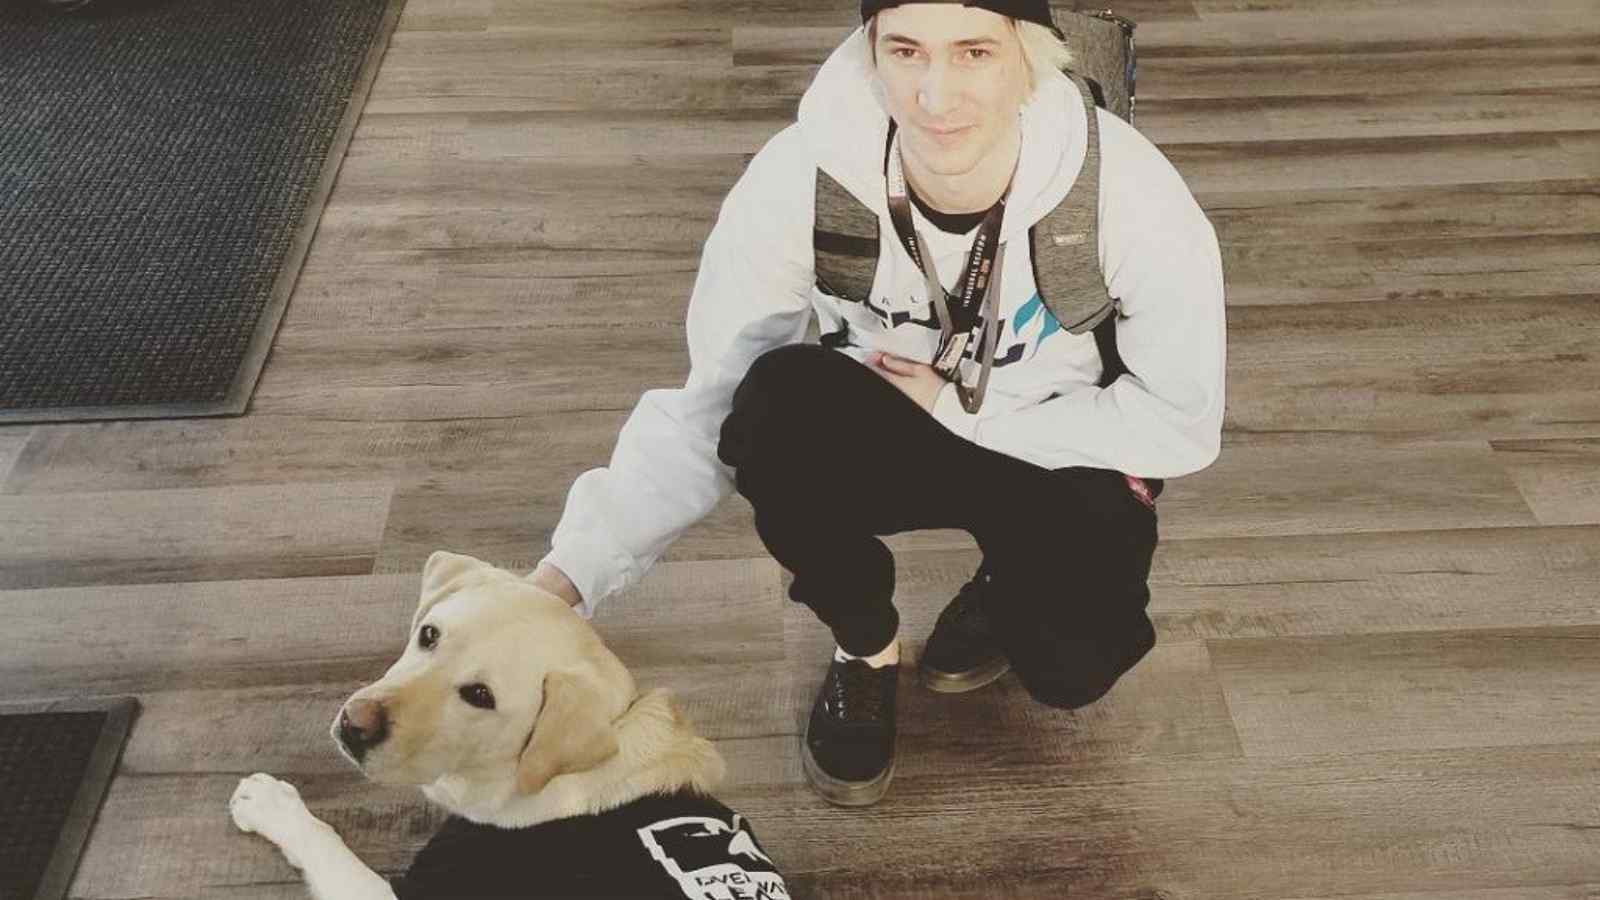 xQc Biography: Age, Siblings, Parents, Career, Net Worth